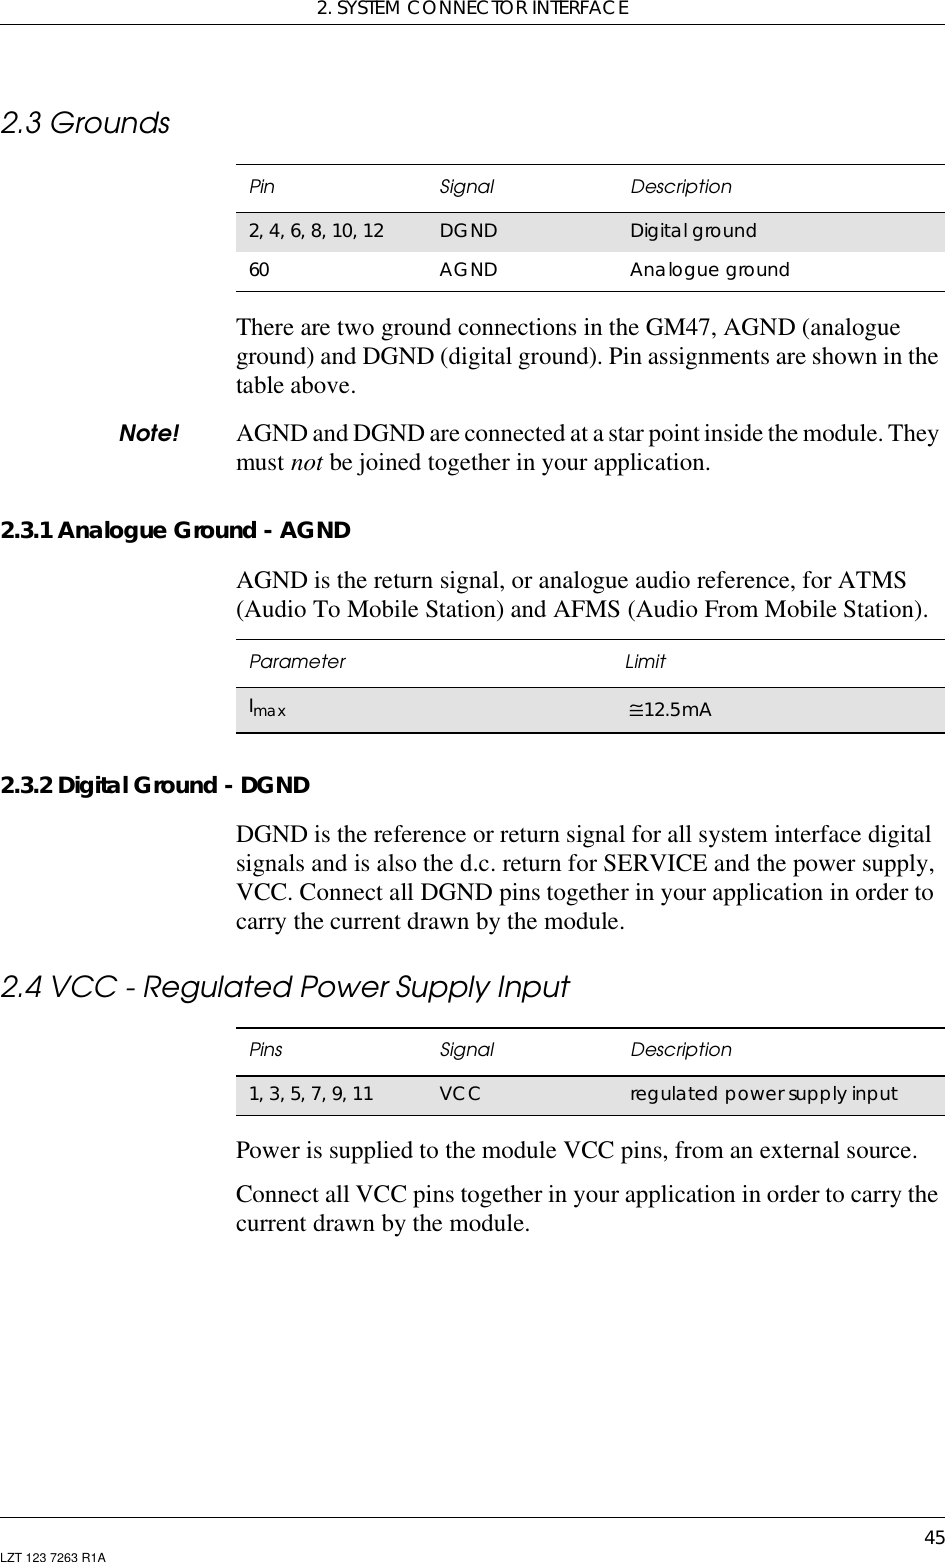 2. SYSTEM CONNECTOR INTERFACE45LZT 123 7263 R1A2.3 GroundsThere are two ground connections in the GM47, AGND (analogueground) and DGND (digital ground). Pin assignments are shown in thetable above.Note! AGND and DGND are connected at a star point inside the module. Theymust not be joined together in your application.2.3.1 Analogue Ground - AGNDAGND is the return signal, or analogue audio reference, for ATMS(Audio To Mobile Station) and AFMS (Audio From Mobile Station).2.3.2 Digital Ground - DGNDDGND is the reference or return signal for all system interface digitalsignals and is also the d.c. return for SERVICE and the power supply,VCC. Connect all DGND pins together in your application in order tocarry the current drawn by the module.2.4 VCC - Regulated Power Supply InputPower is supplied to the module VCC pins, from an external source.Connect all VCC pins together in your application in order to carry thecurrent drawn by the module.Pin Signal Description2, 4, 6, 8, 10, 12 DGND Digital ground60 AGND Analogue groundParameter LimitImax ≅12.5mAPins Signal Description1, 3, 5, 7, 9, 11 VCC regulated power supply input